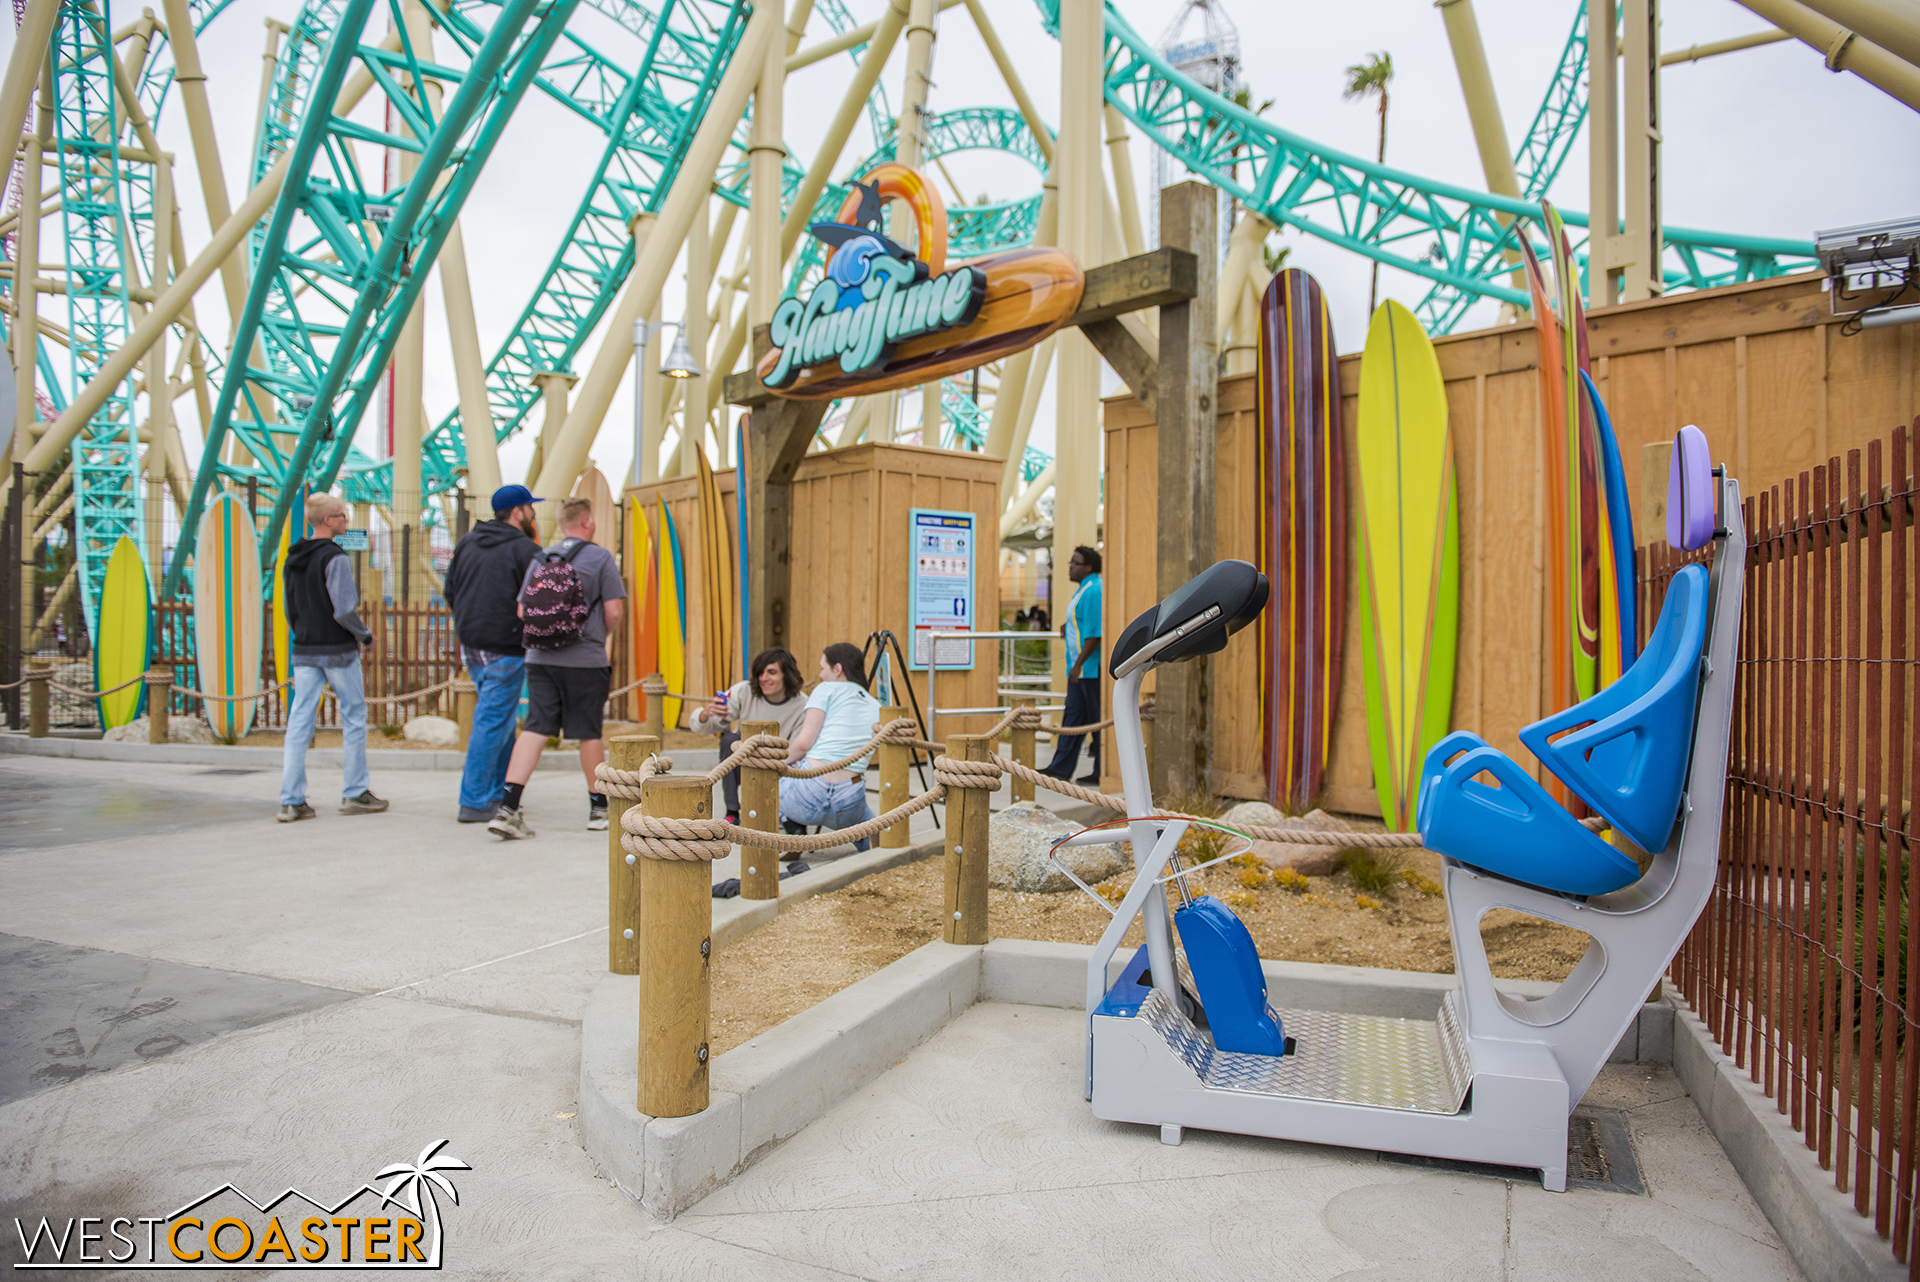  A tester seat is available in front of the queue entry for those who are unsure if they can safely fit on the roller coaster. 